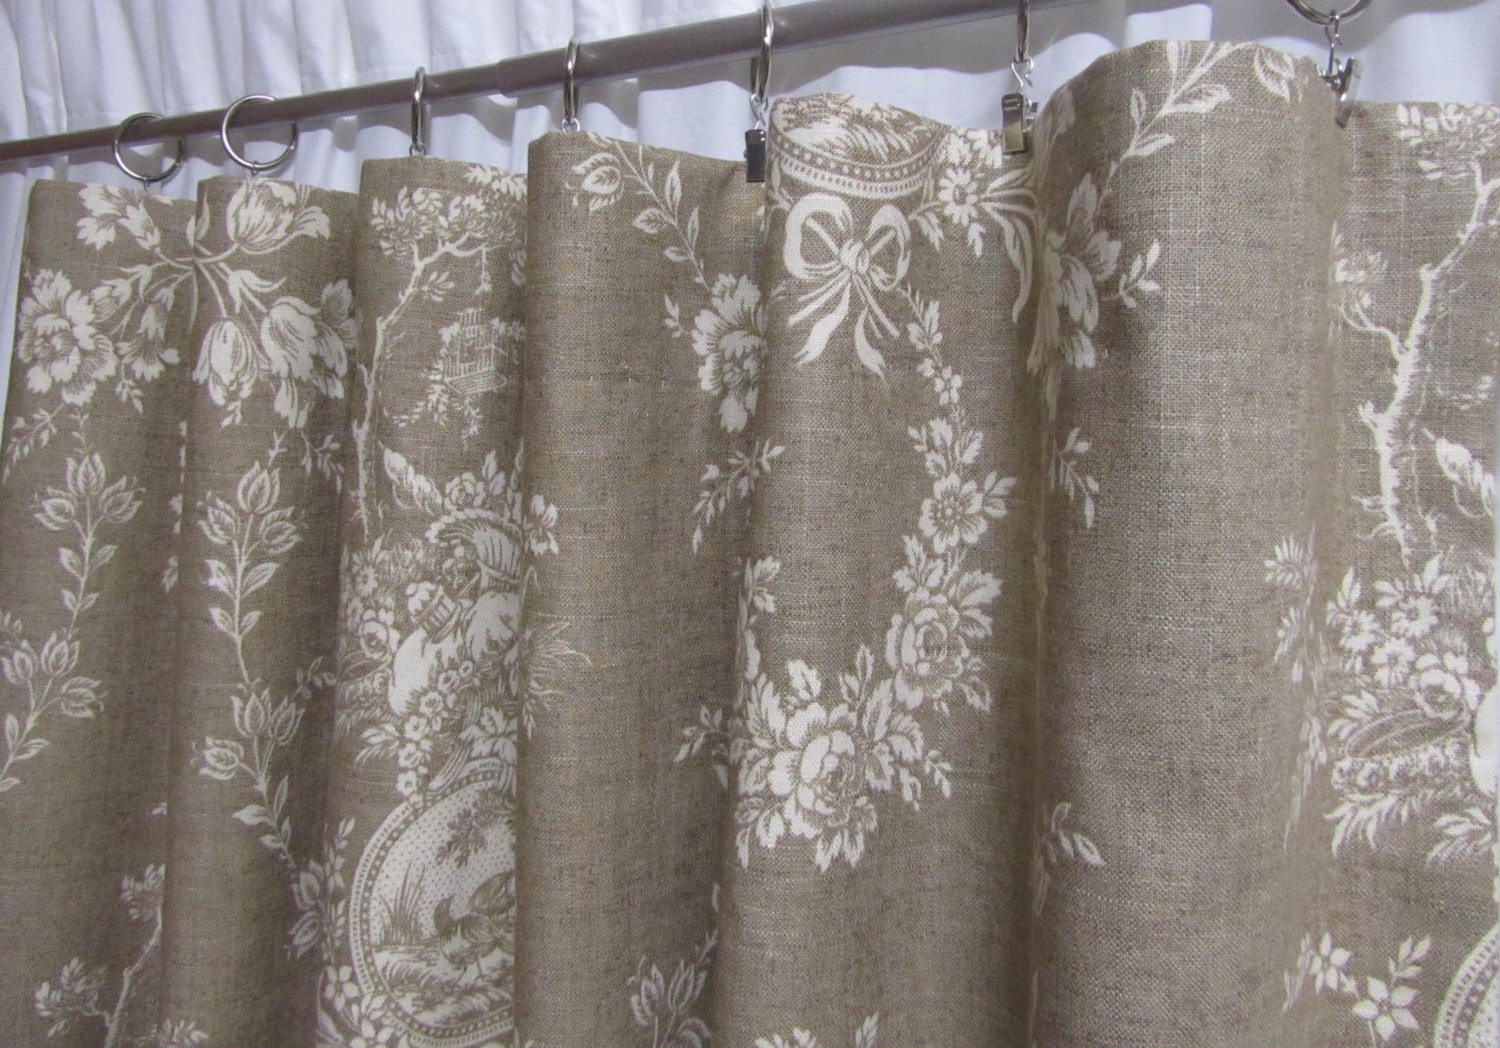 French country curtains neutral toile drapes linen colored